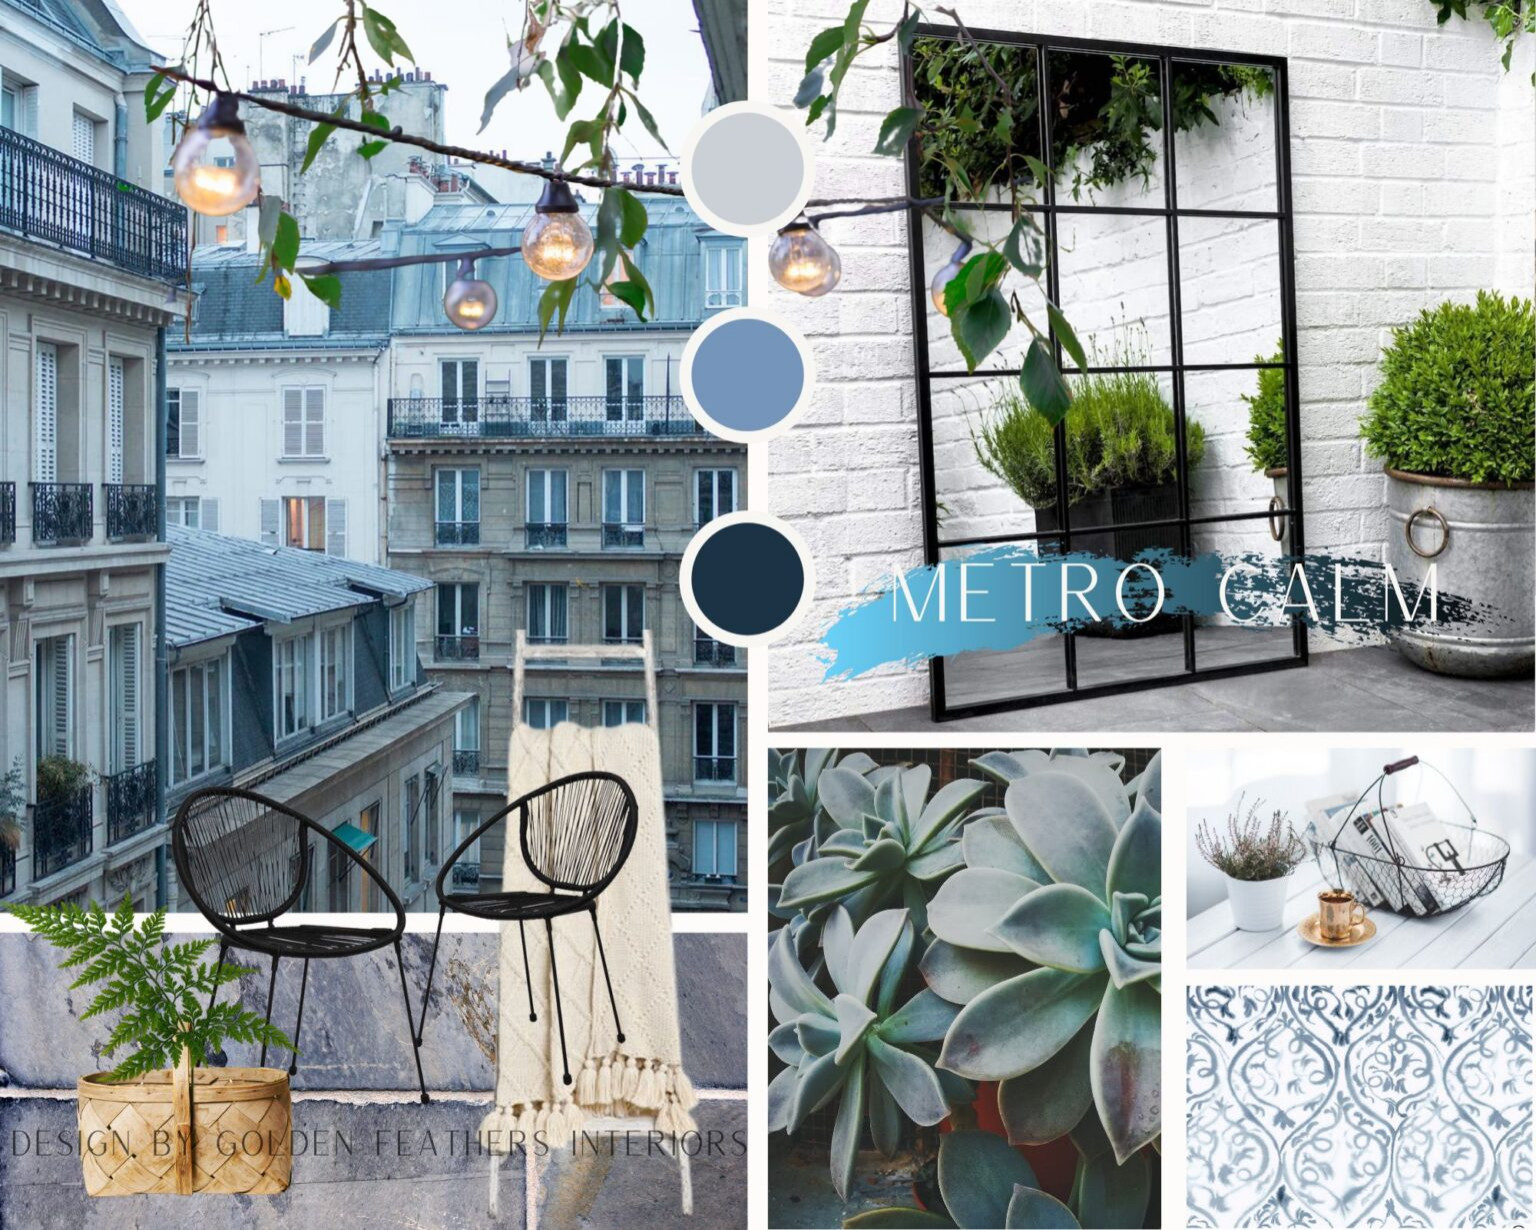 Metro Calm:  This design works well from an inner city to a larger suburban garden space. Its cool, calm and chic. The colour blue exudes tranquility and breathes serenity into a more bustling living